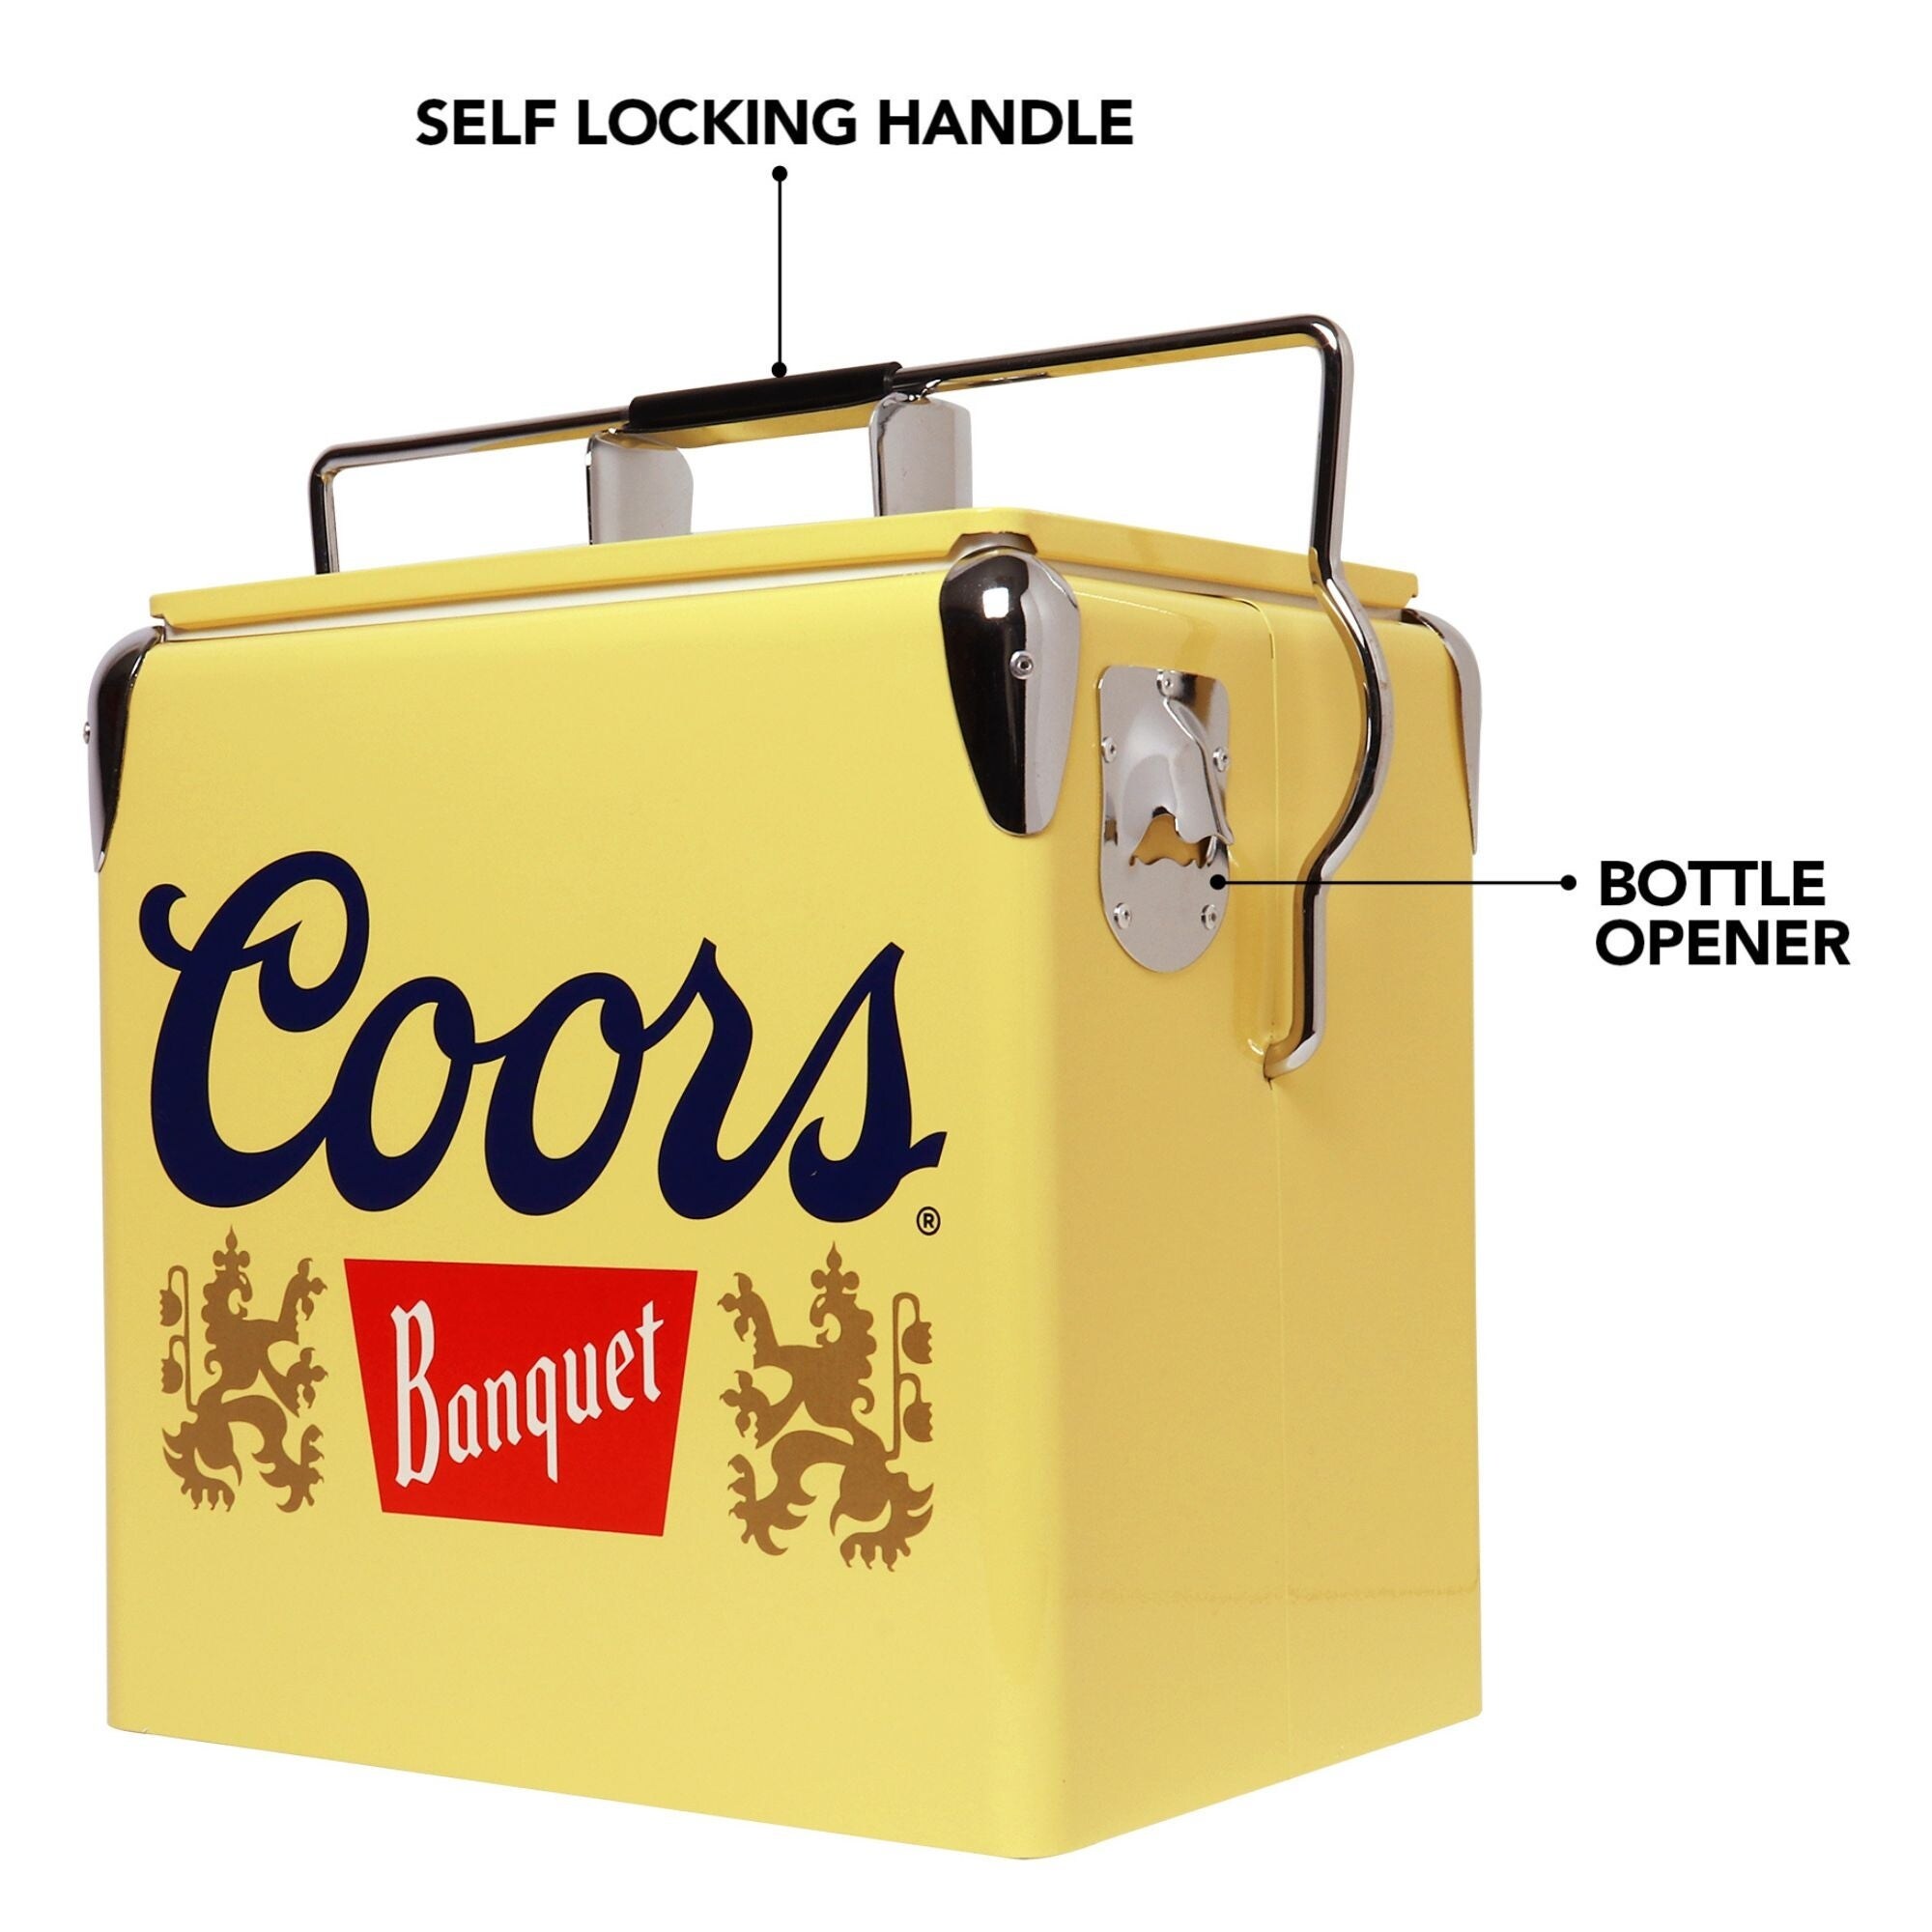 Coors Light 18 Can Ice Chest with Bottle Opener (14 Quarts/13 Liters)